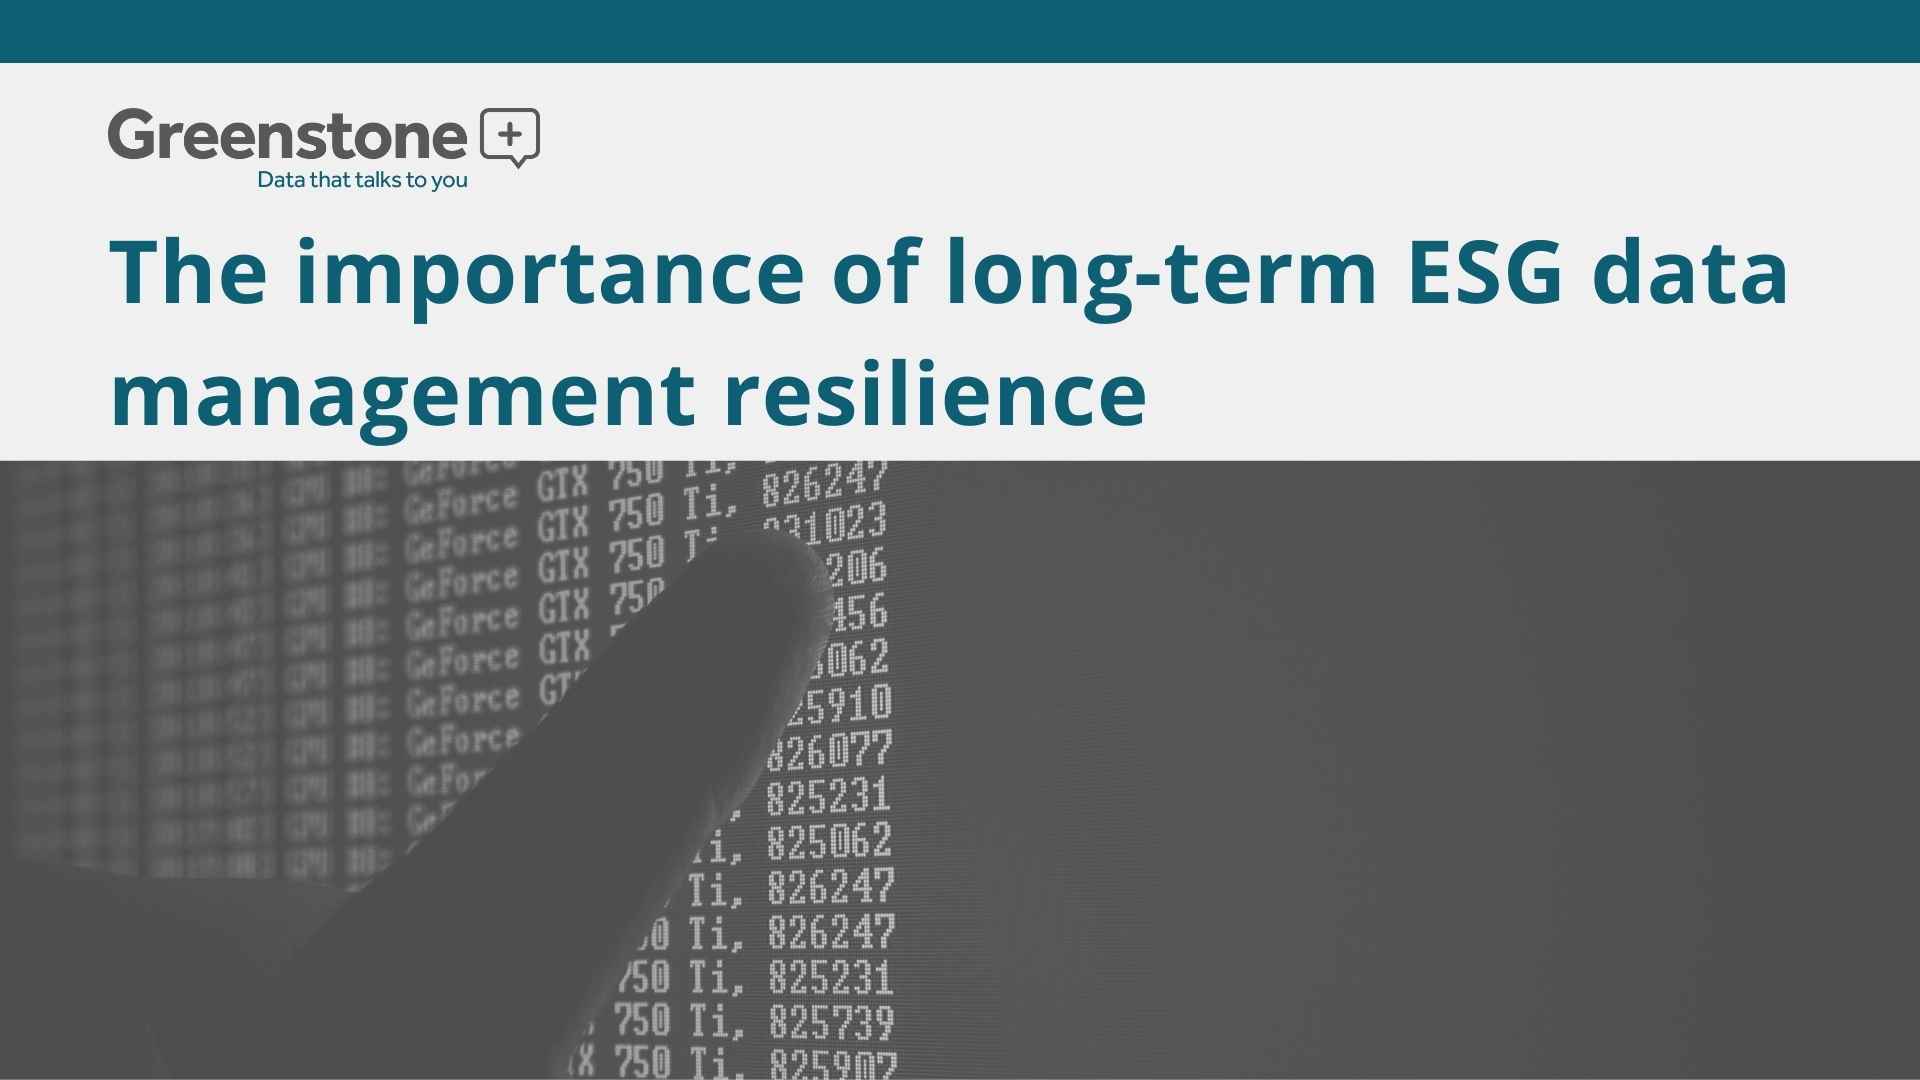 The importance of long-term ESG data management resilience